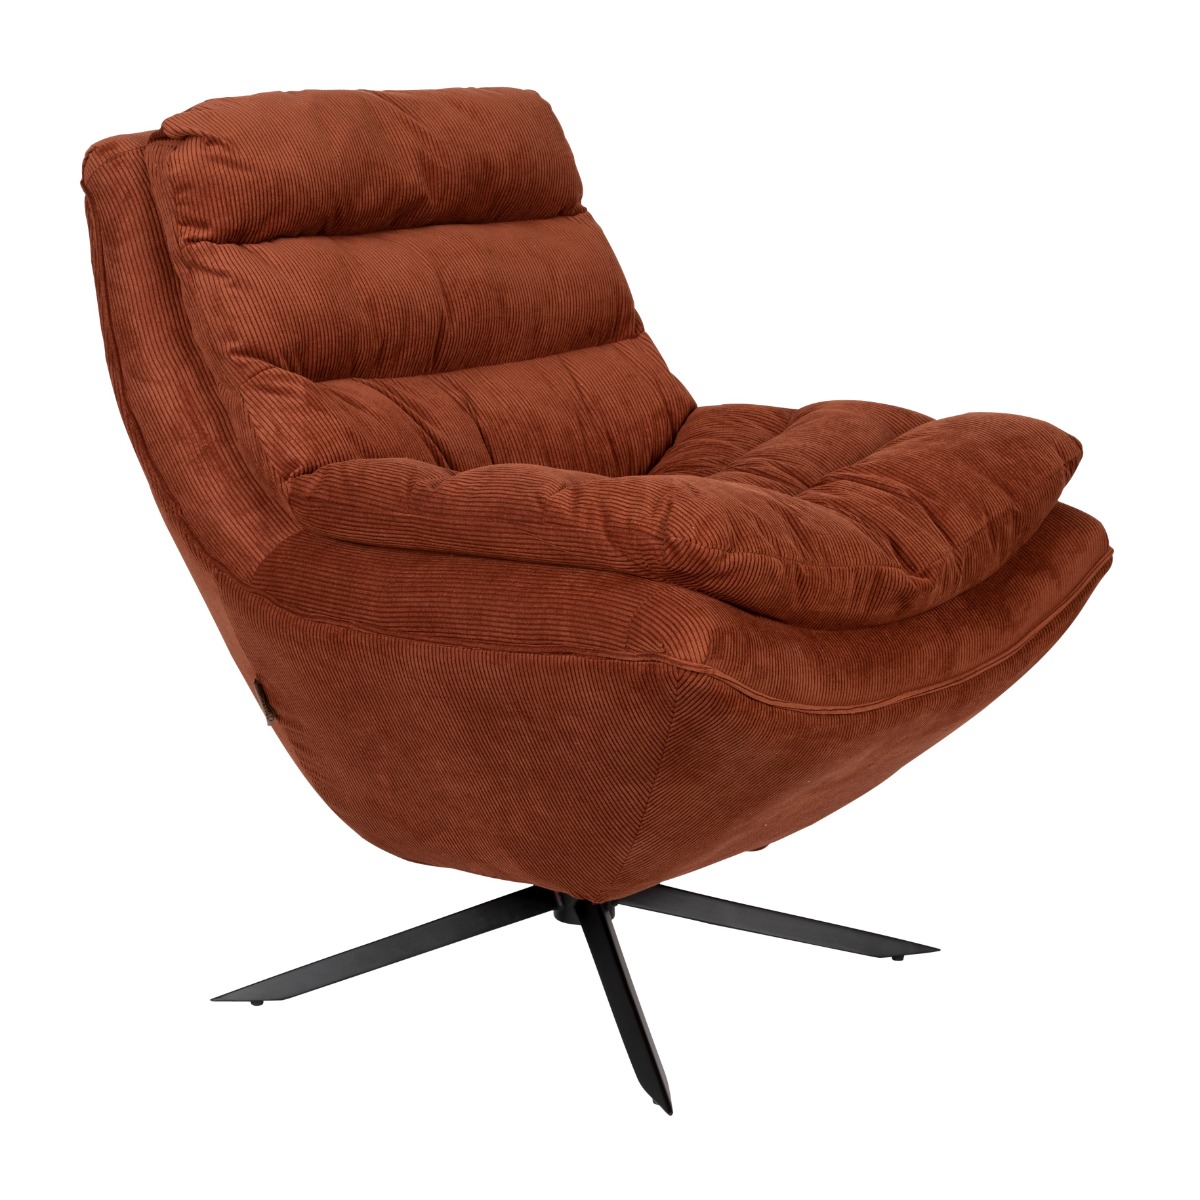 Vince Lounge Chair in Terracotta